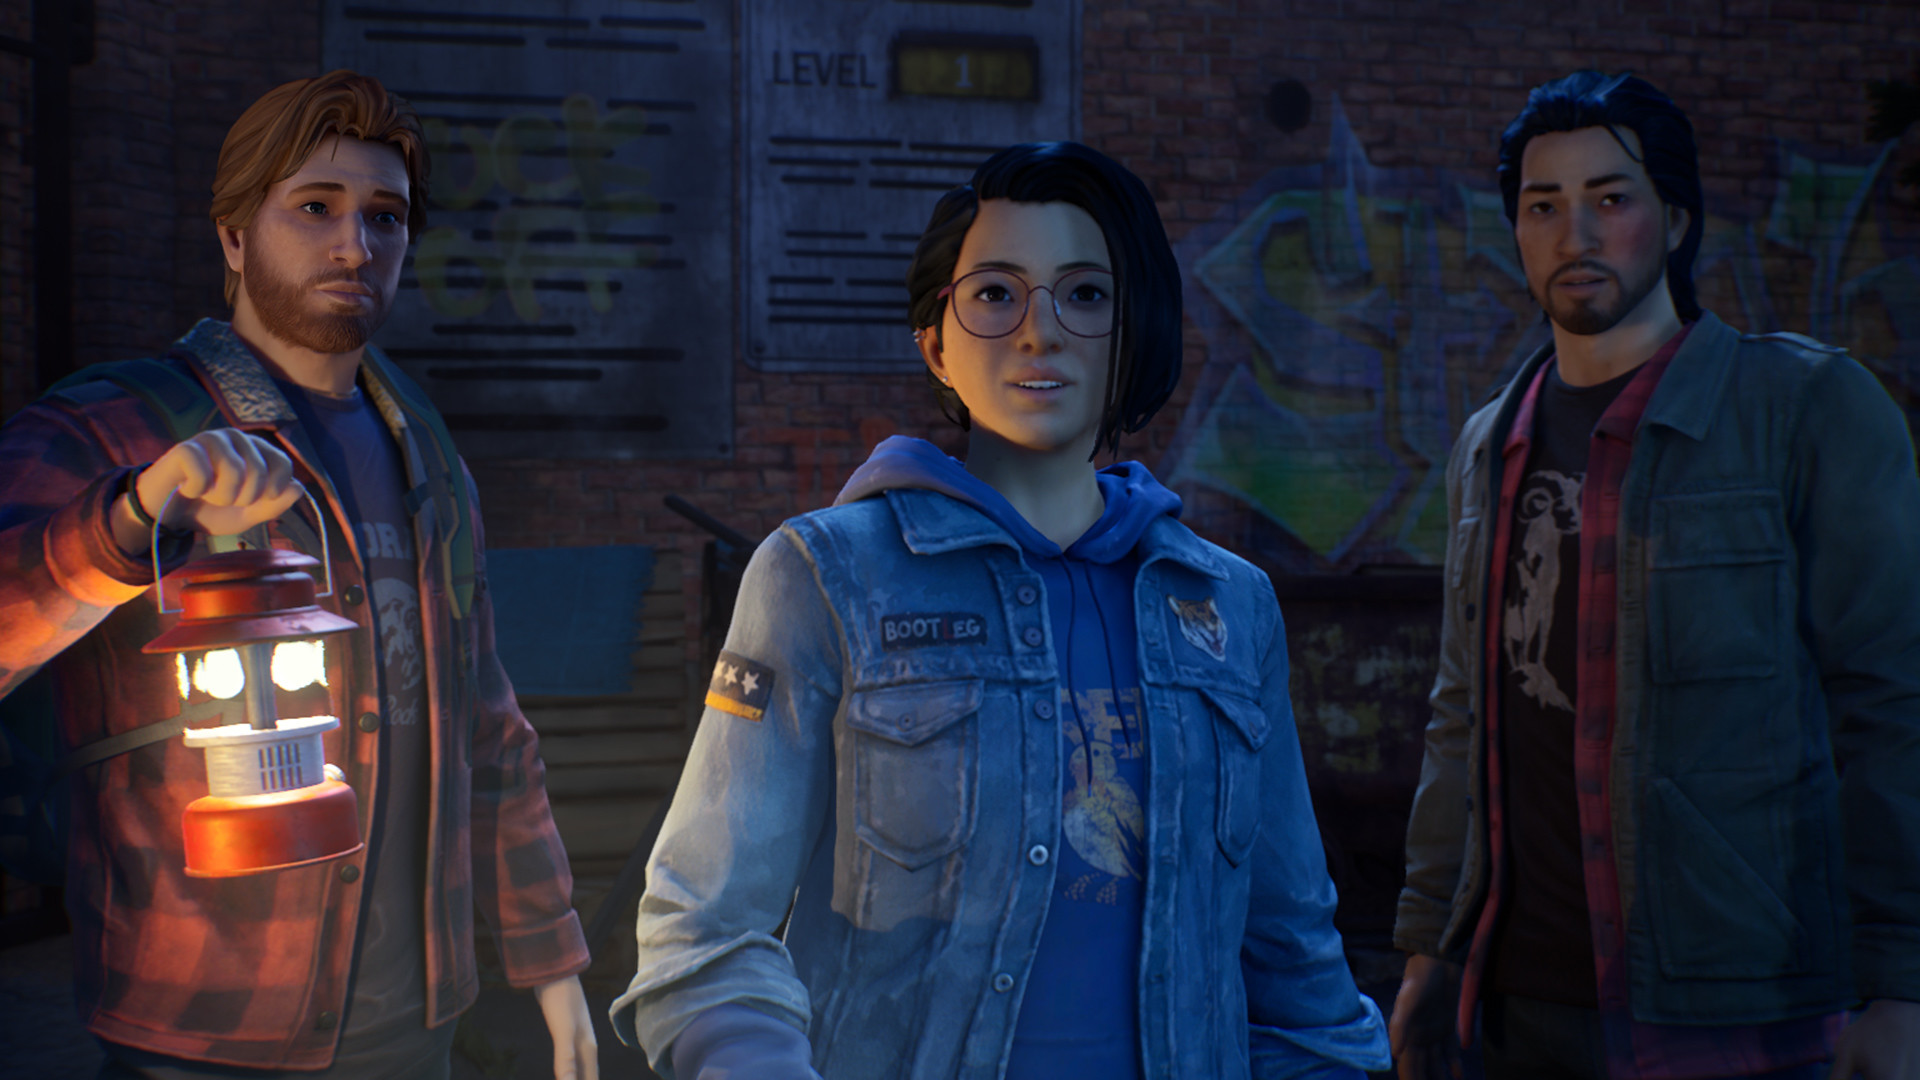 download life is strange true colors for free